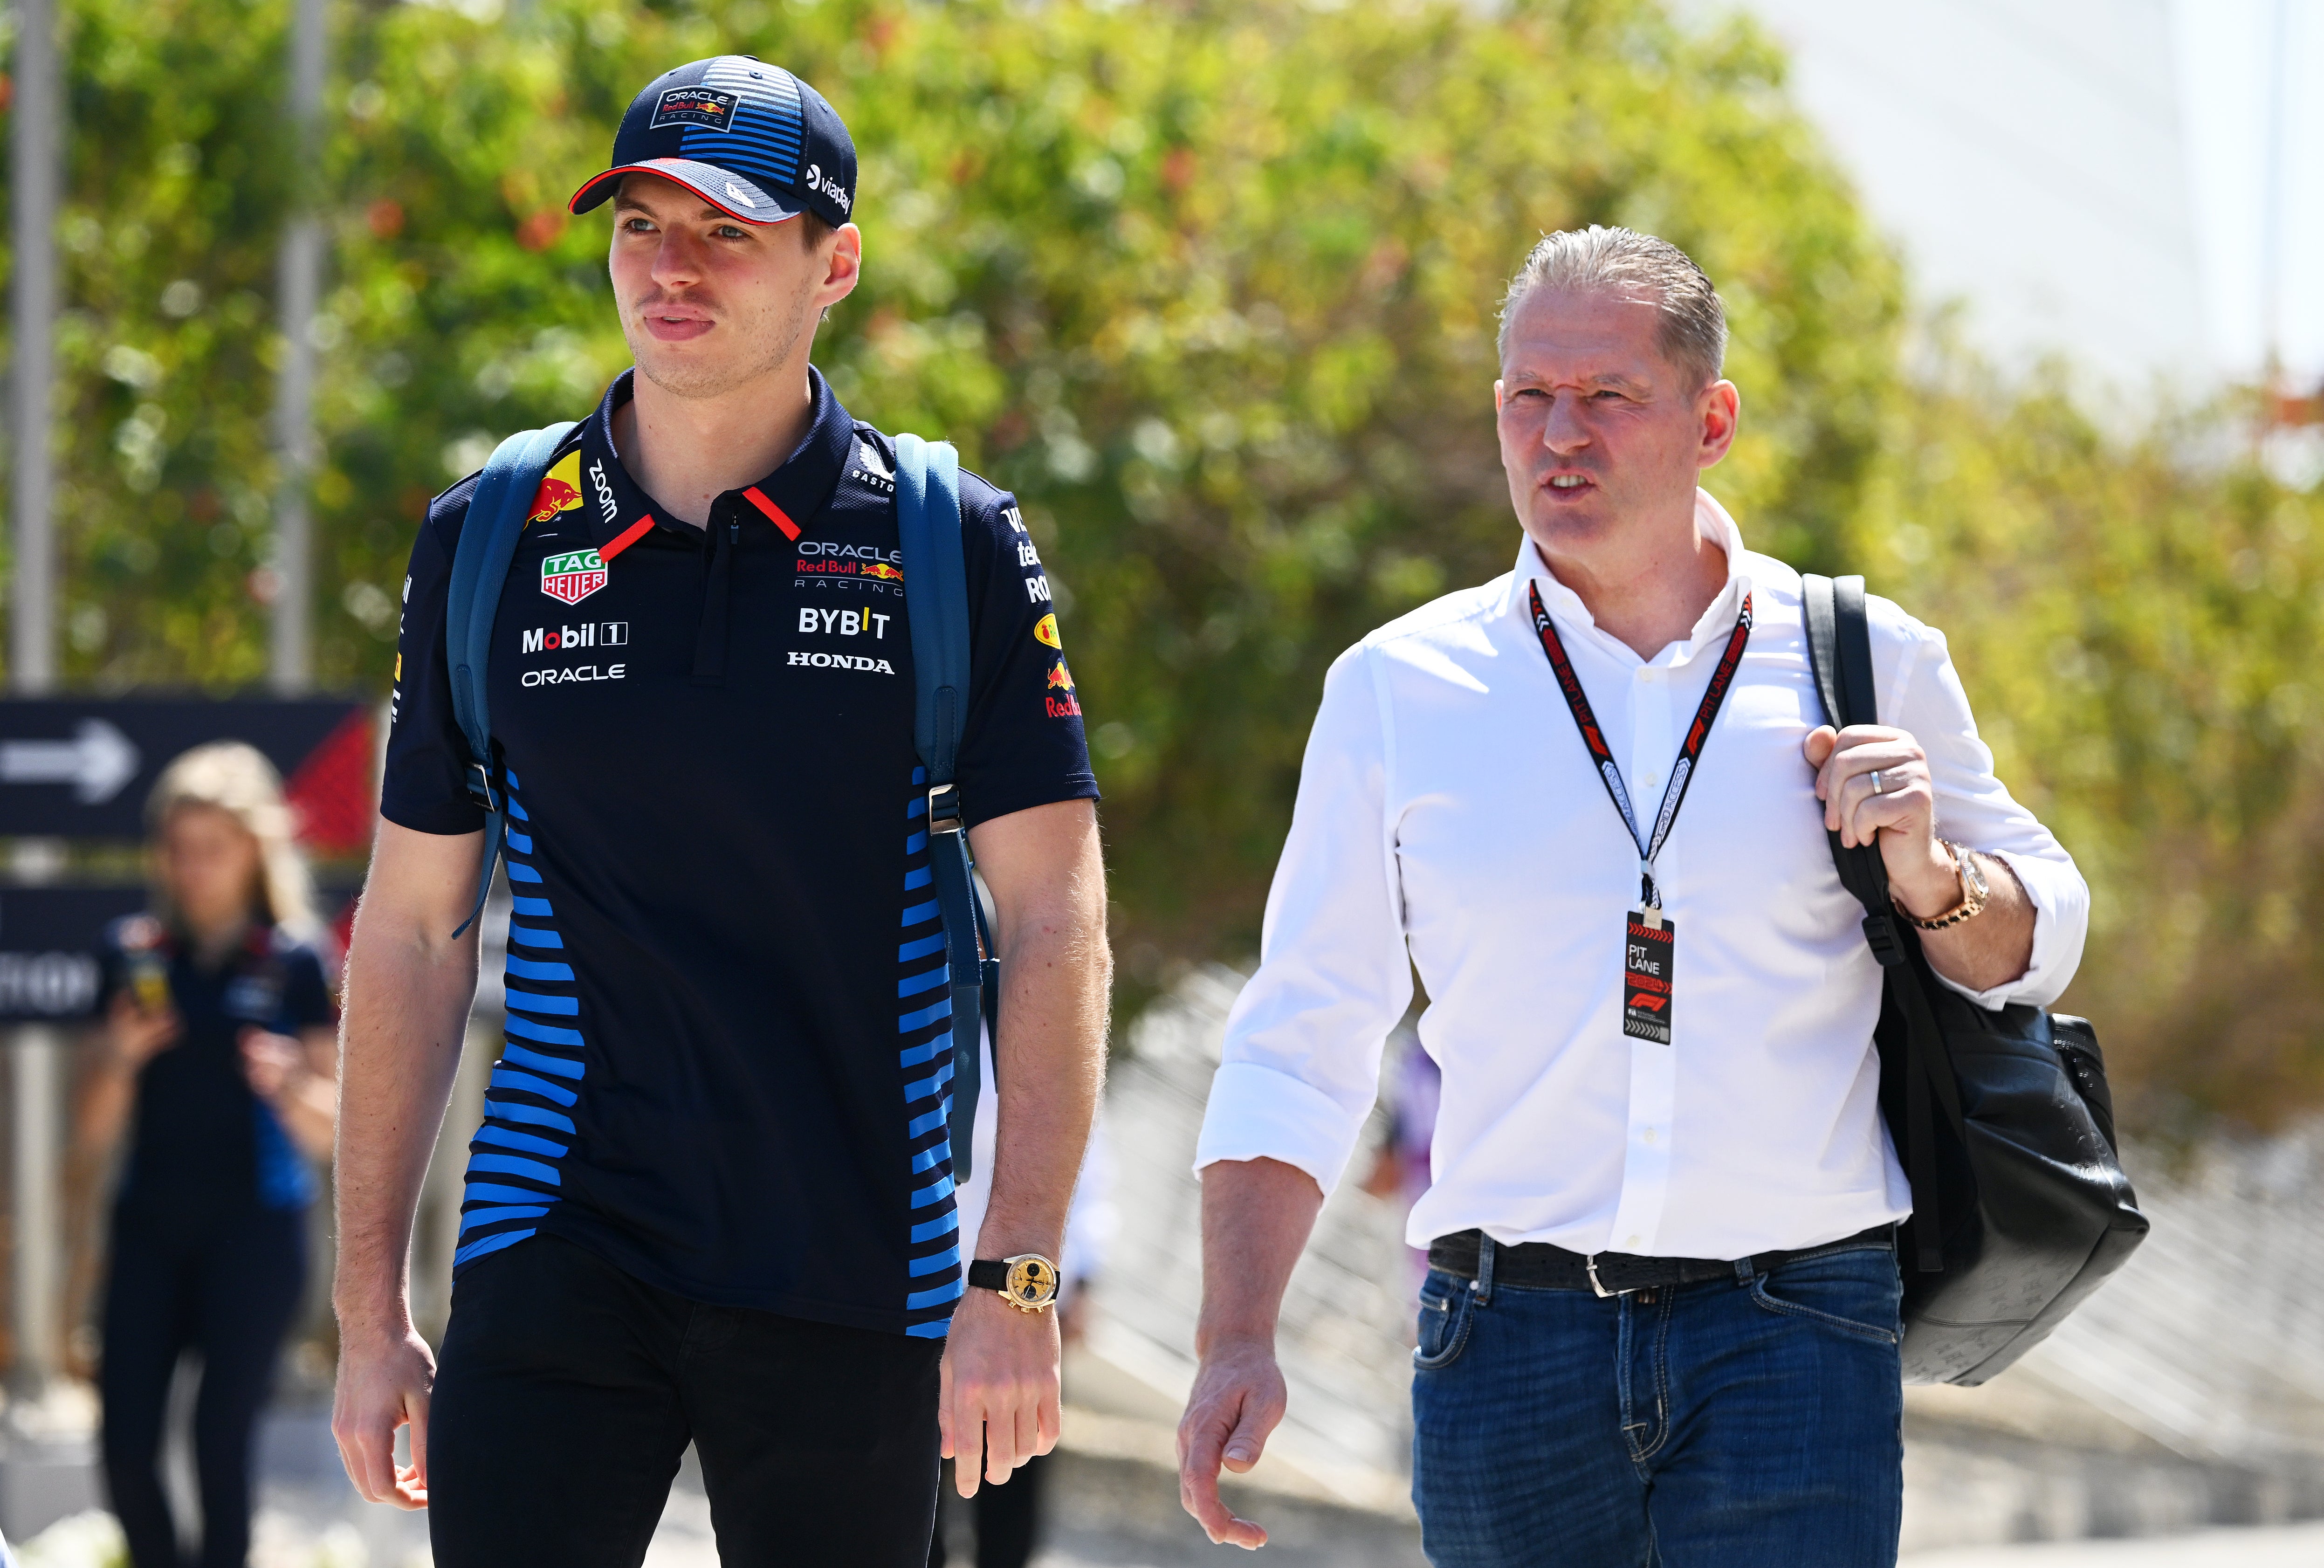 Jos Verstappen predicted Red Bull would ‘explode’ if Horner stayed in his position